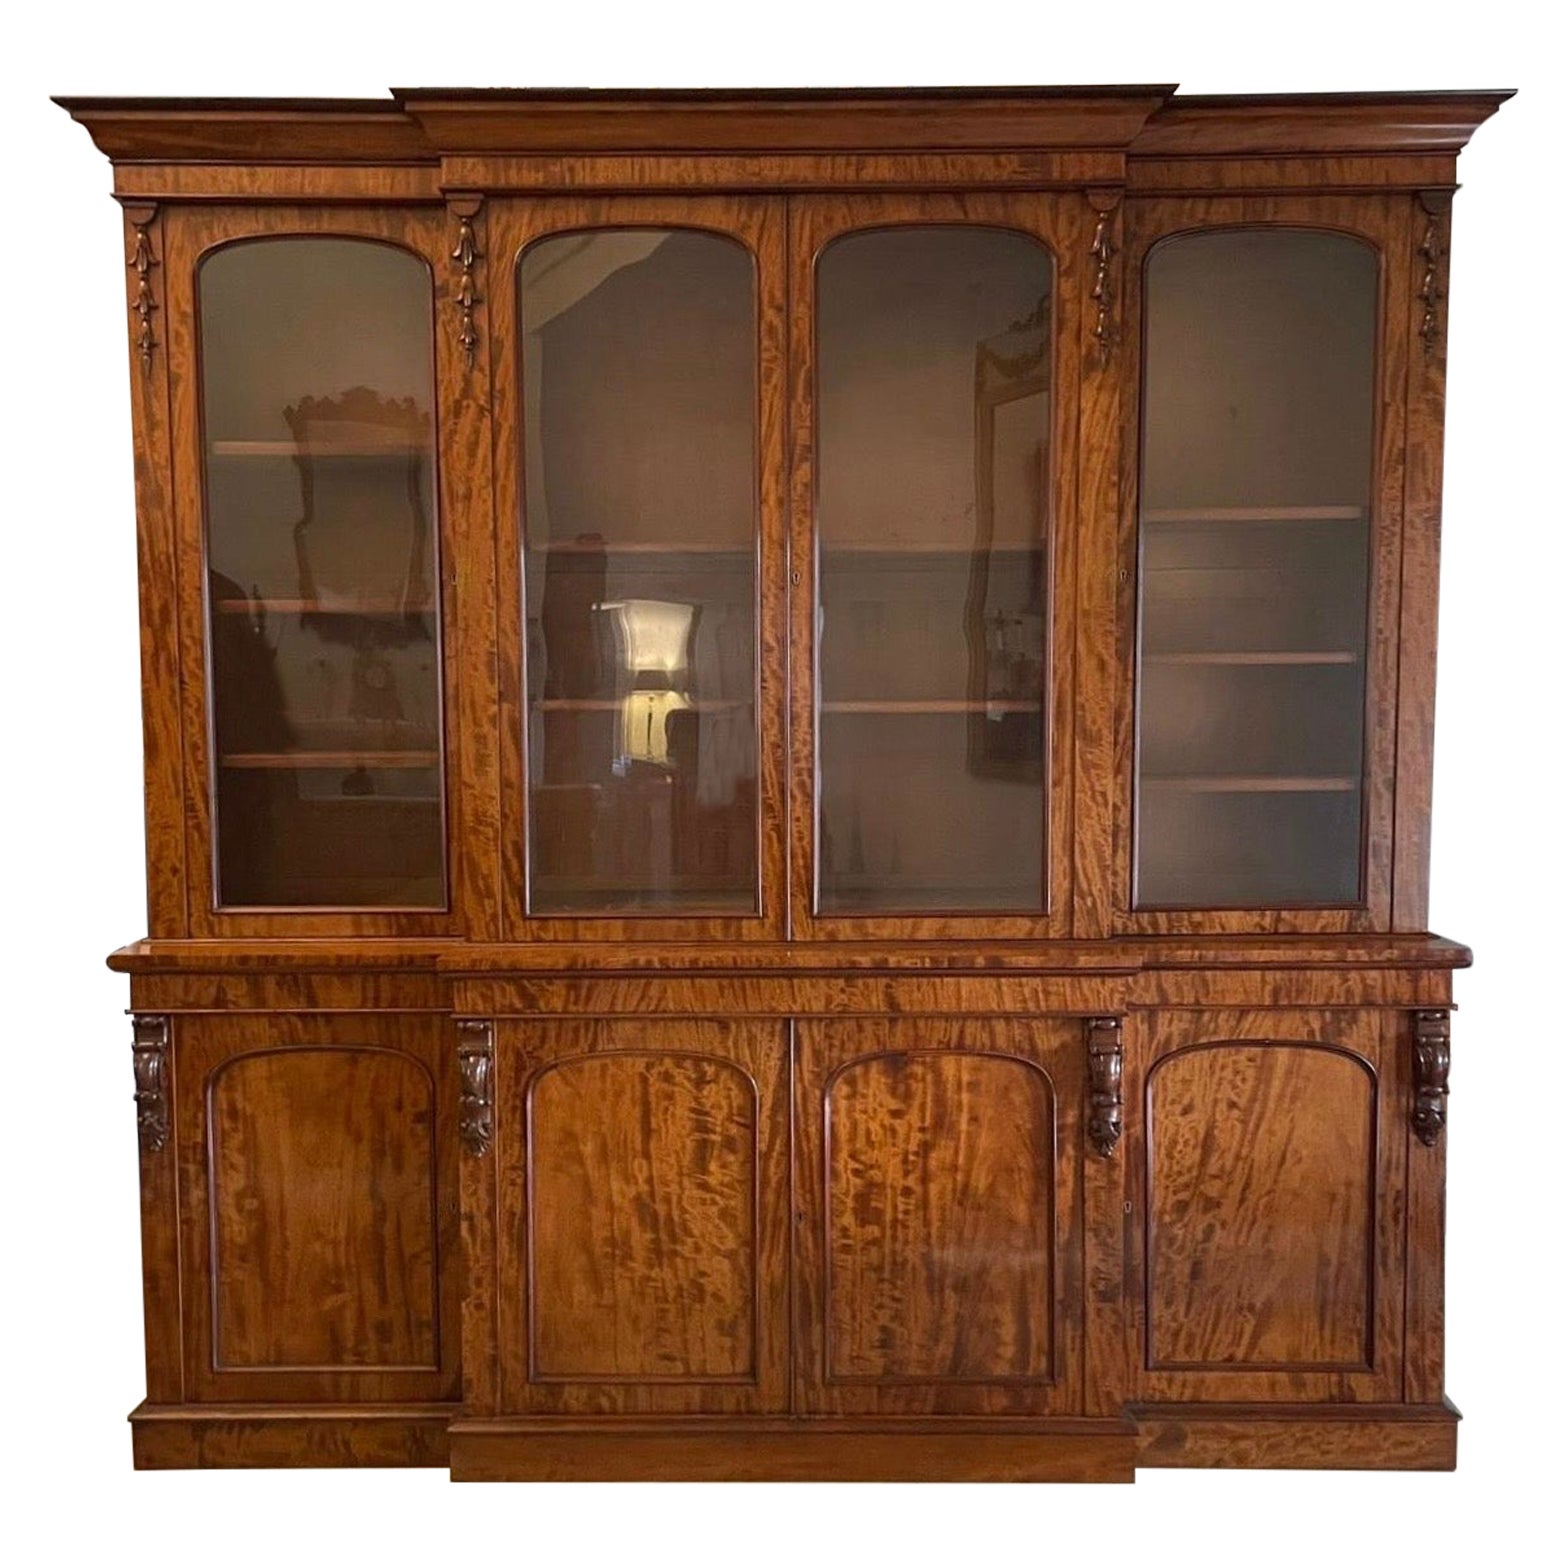 Outstanding Quality Large Antique Victorian Figured Mahogany Breakfront Bookcase